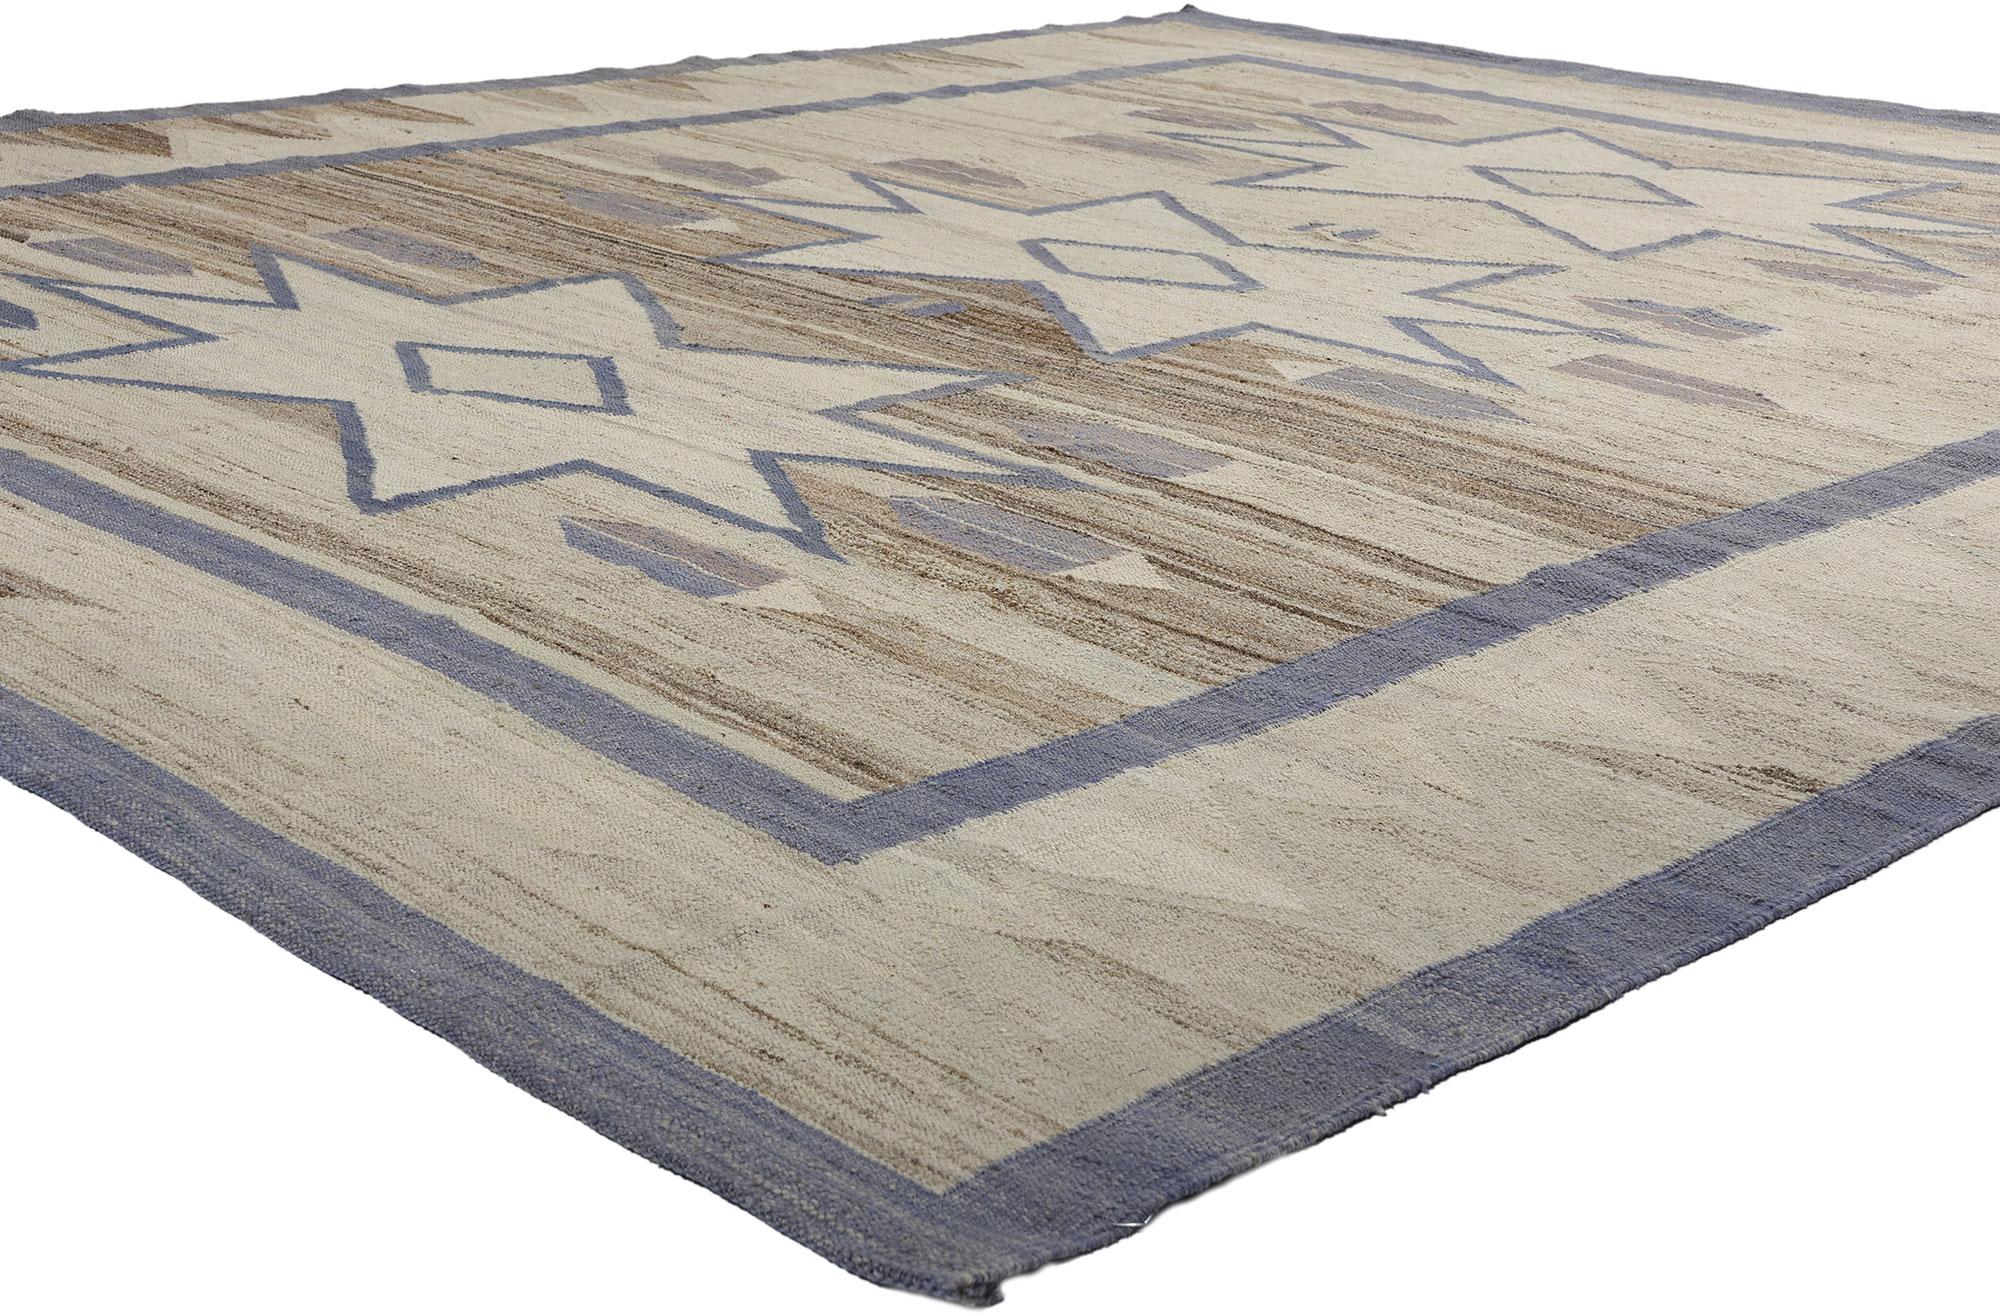 81095 Southwest Modern Desert Navajo-Style Rug, 08'03 x 09'06. Step into the enchanting realm of this handwoven wool Southwest Modern Desert Chic Navajo-style rug, where each thread whispers tales of tradition and modernity interwoven in harmony.